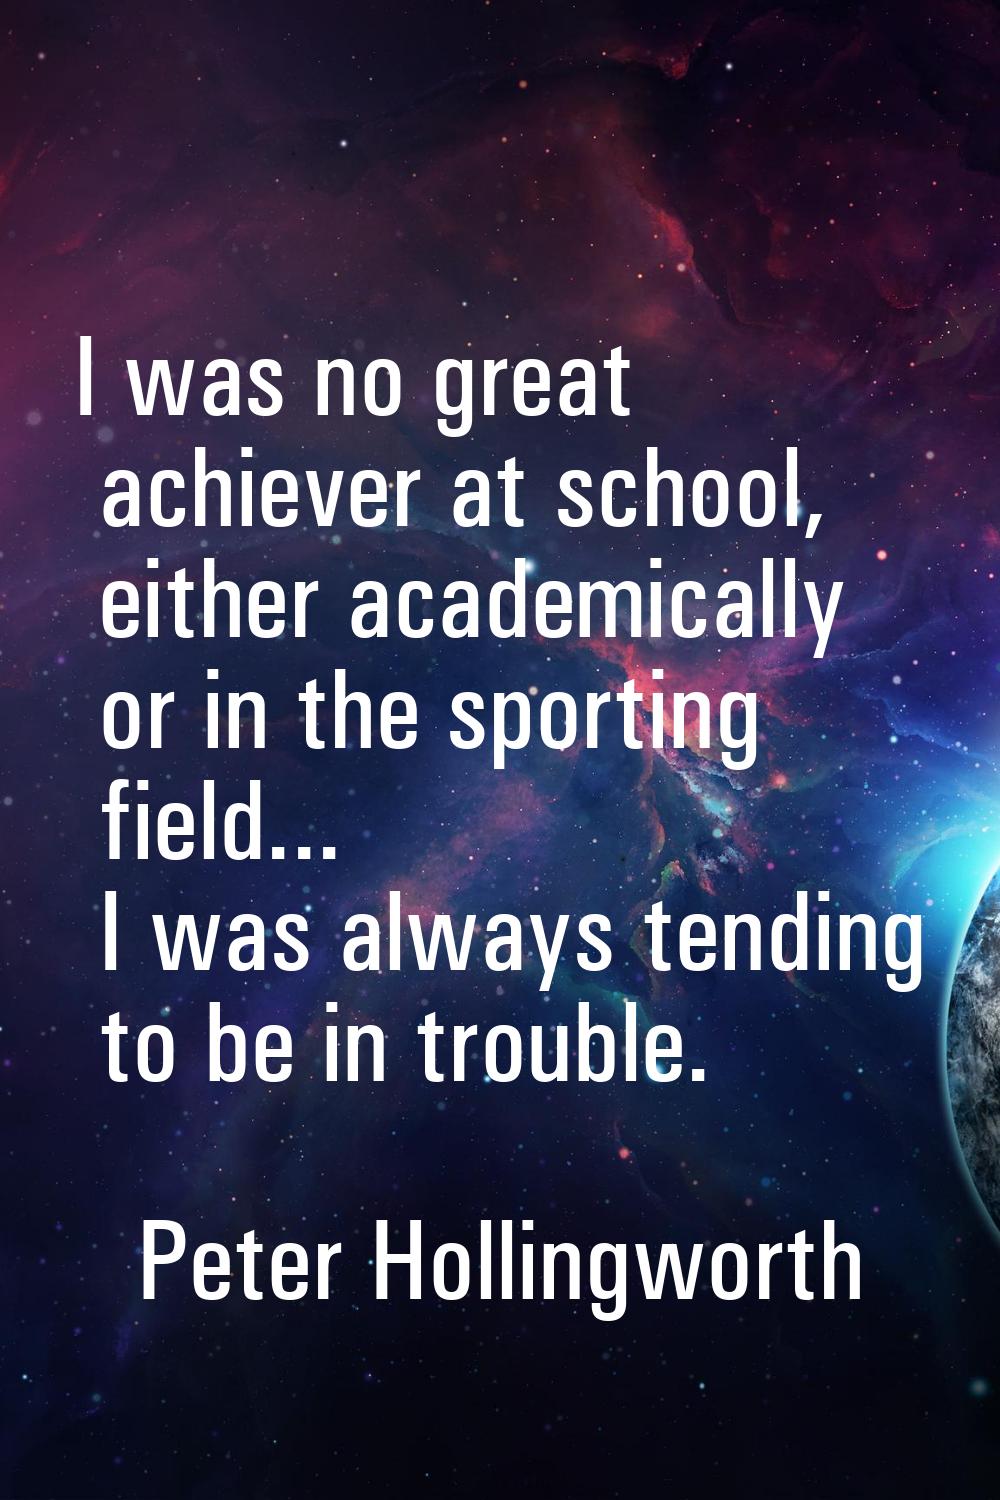 I was no great achiever at school, either academically or in the sporting field... I was always ten